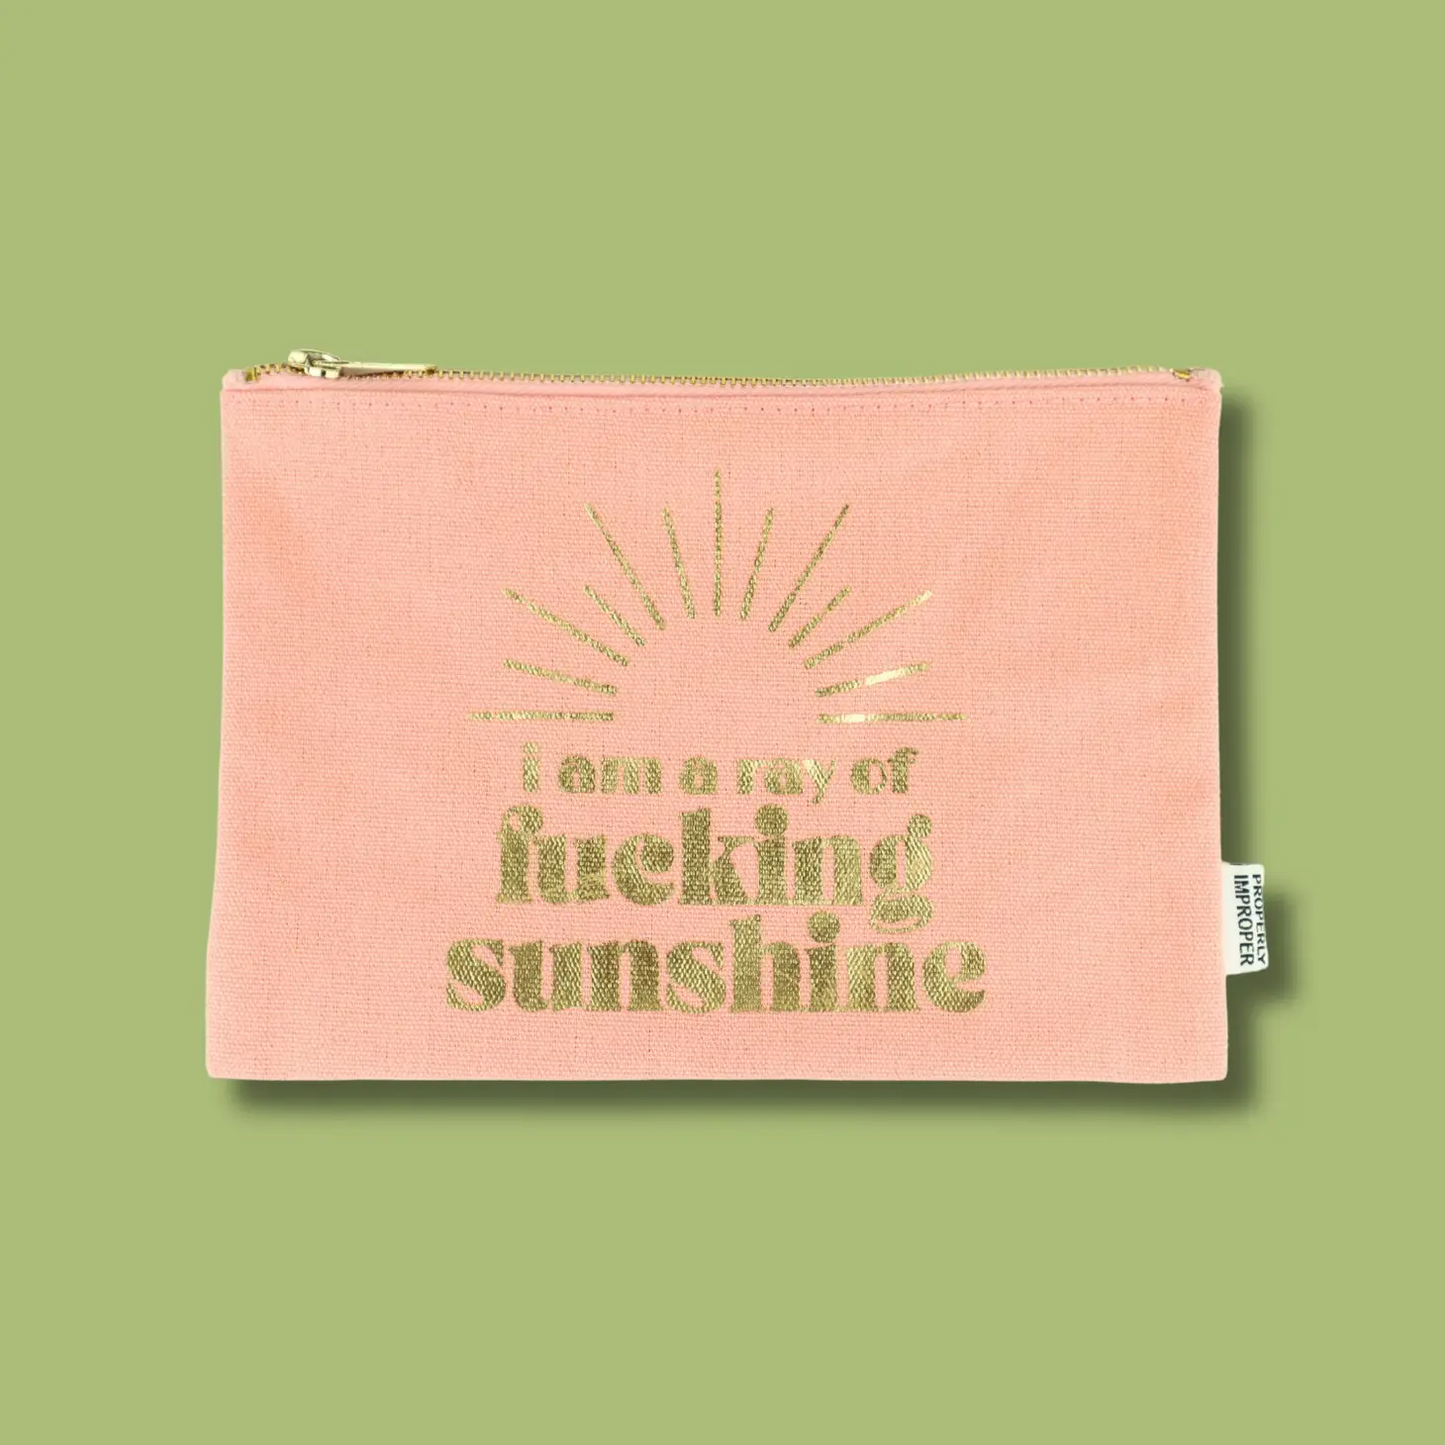 I Am a Fucking Ray of Sunshine Pink Canvas Pouch